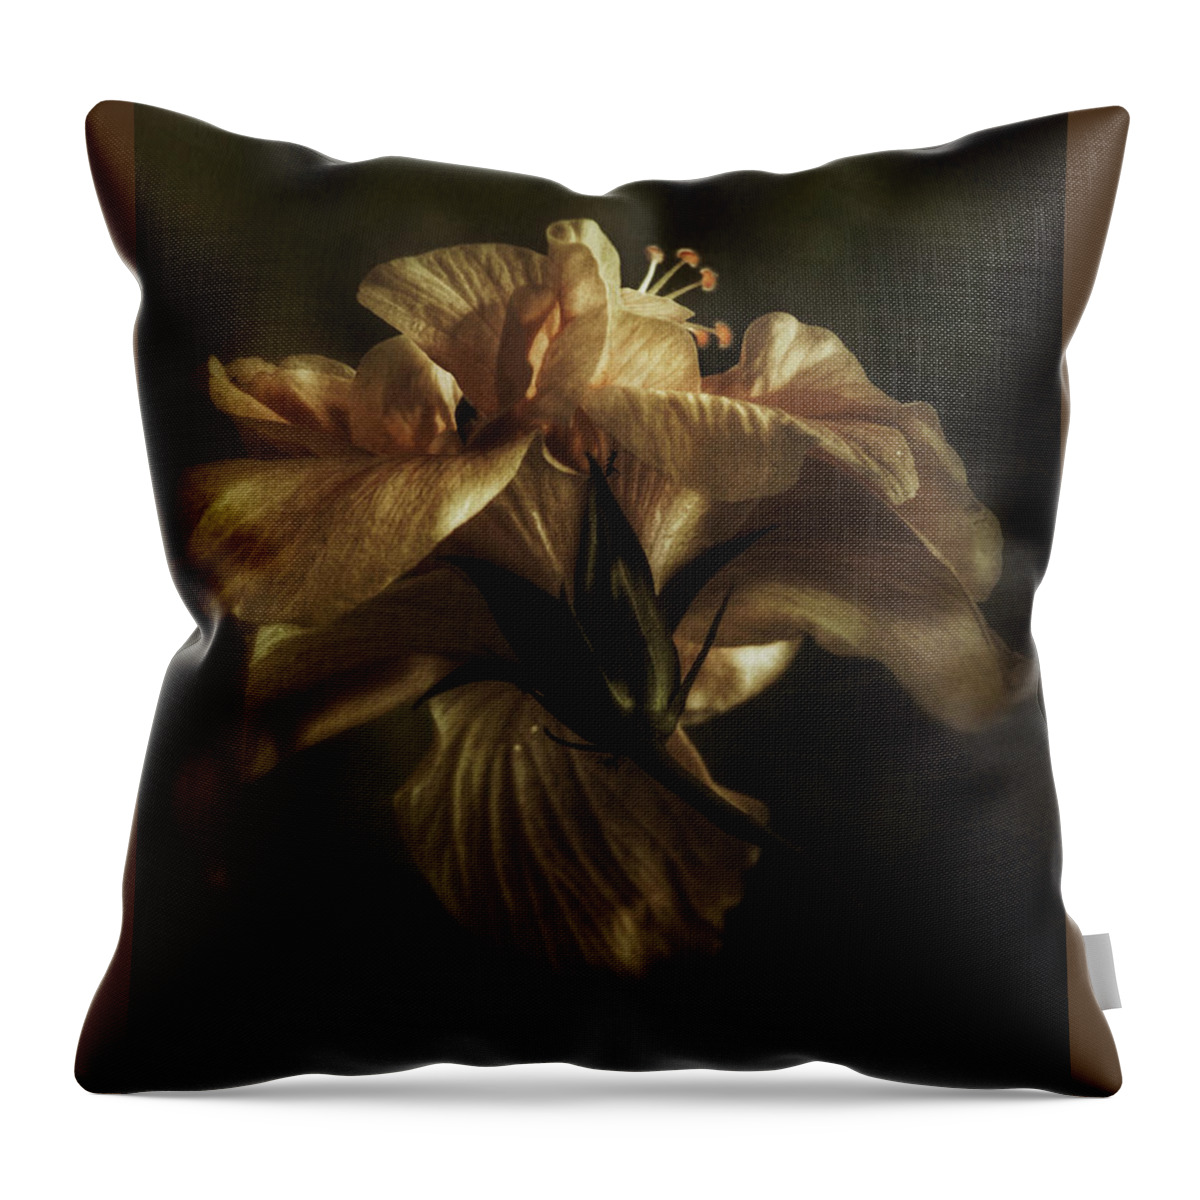 Flower Throw Pillow featuring the photograph Faded Beauty by Brenda Wilcox aka Wildeyed n Wicked